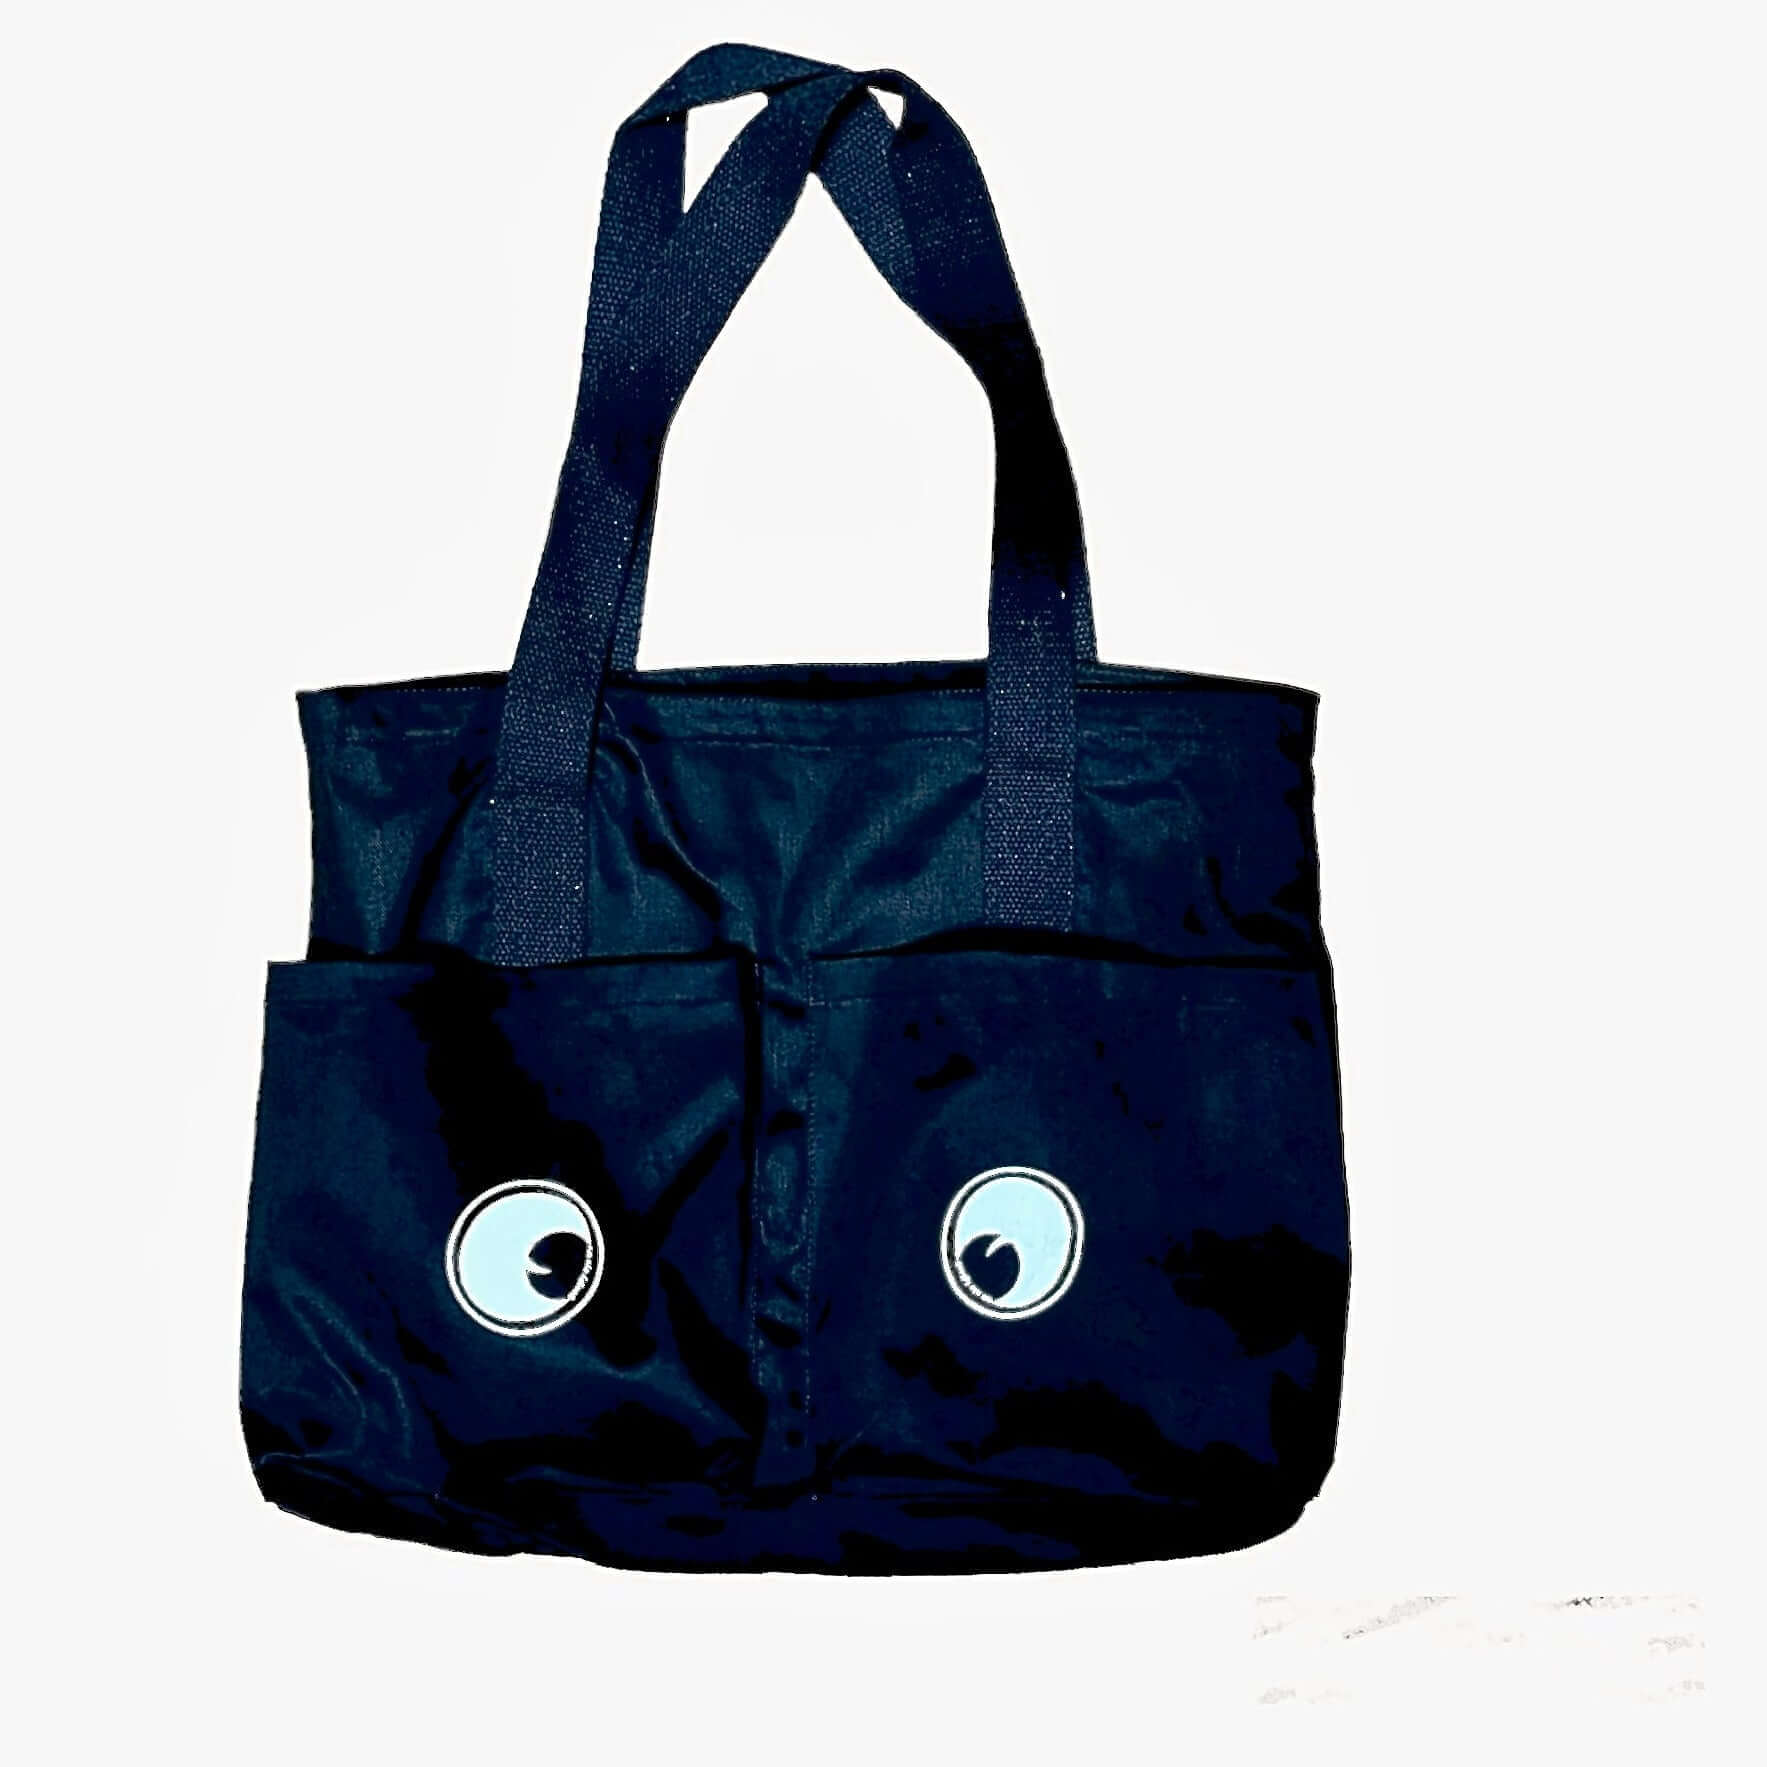 BAG:  Googly Eye Cru x Art To Ware limited edition Glow in the Dark Tote Bag